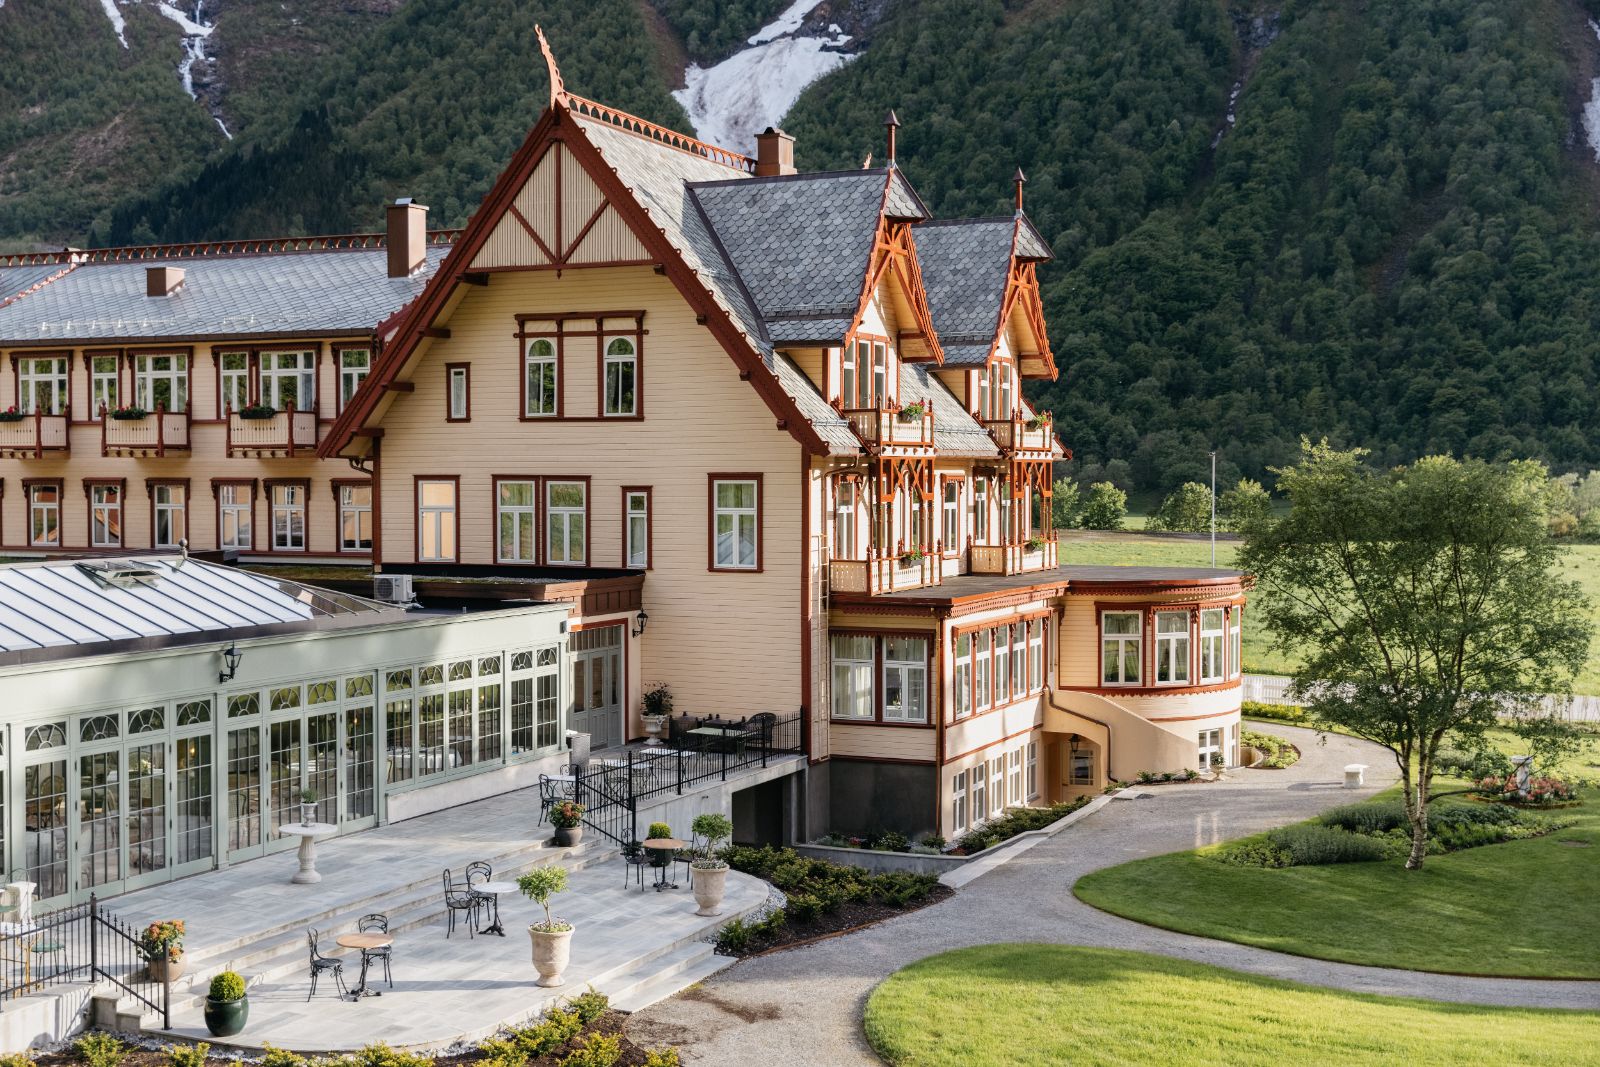 Luxury Hotel in Norway Hotel Union Oye Exterior View with Conservatory